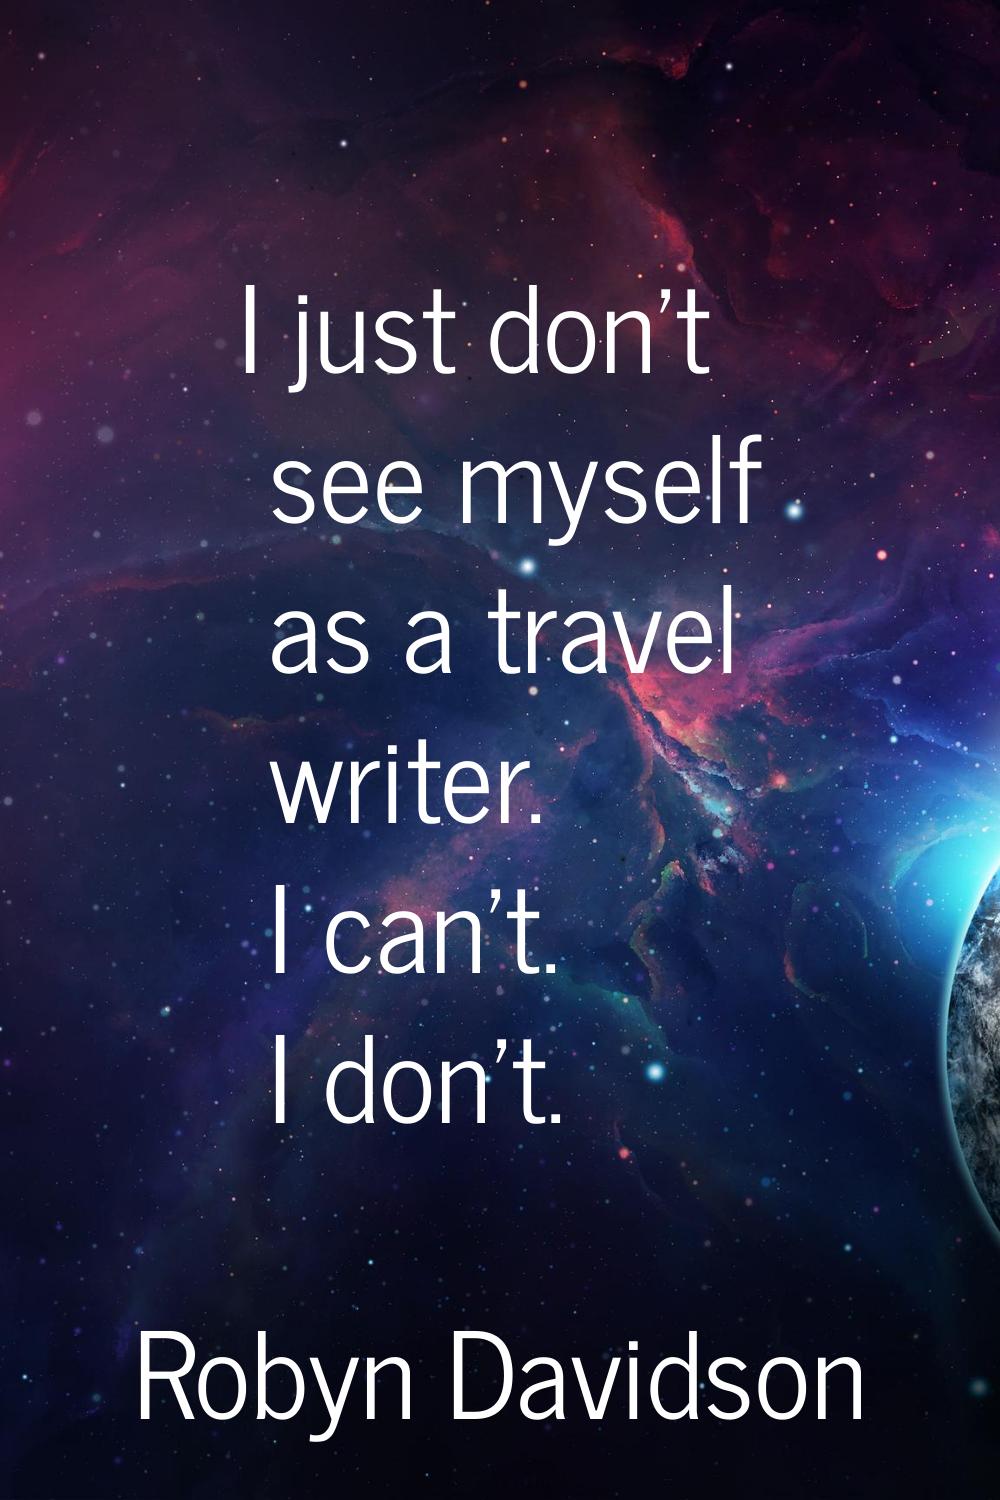 I just don't see myself as a travel writer. I can't. I don't.